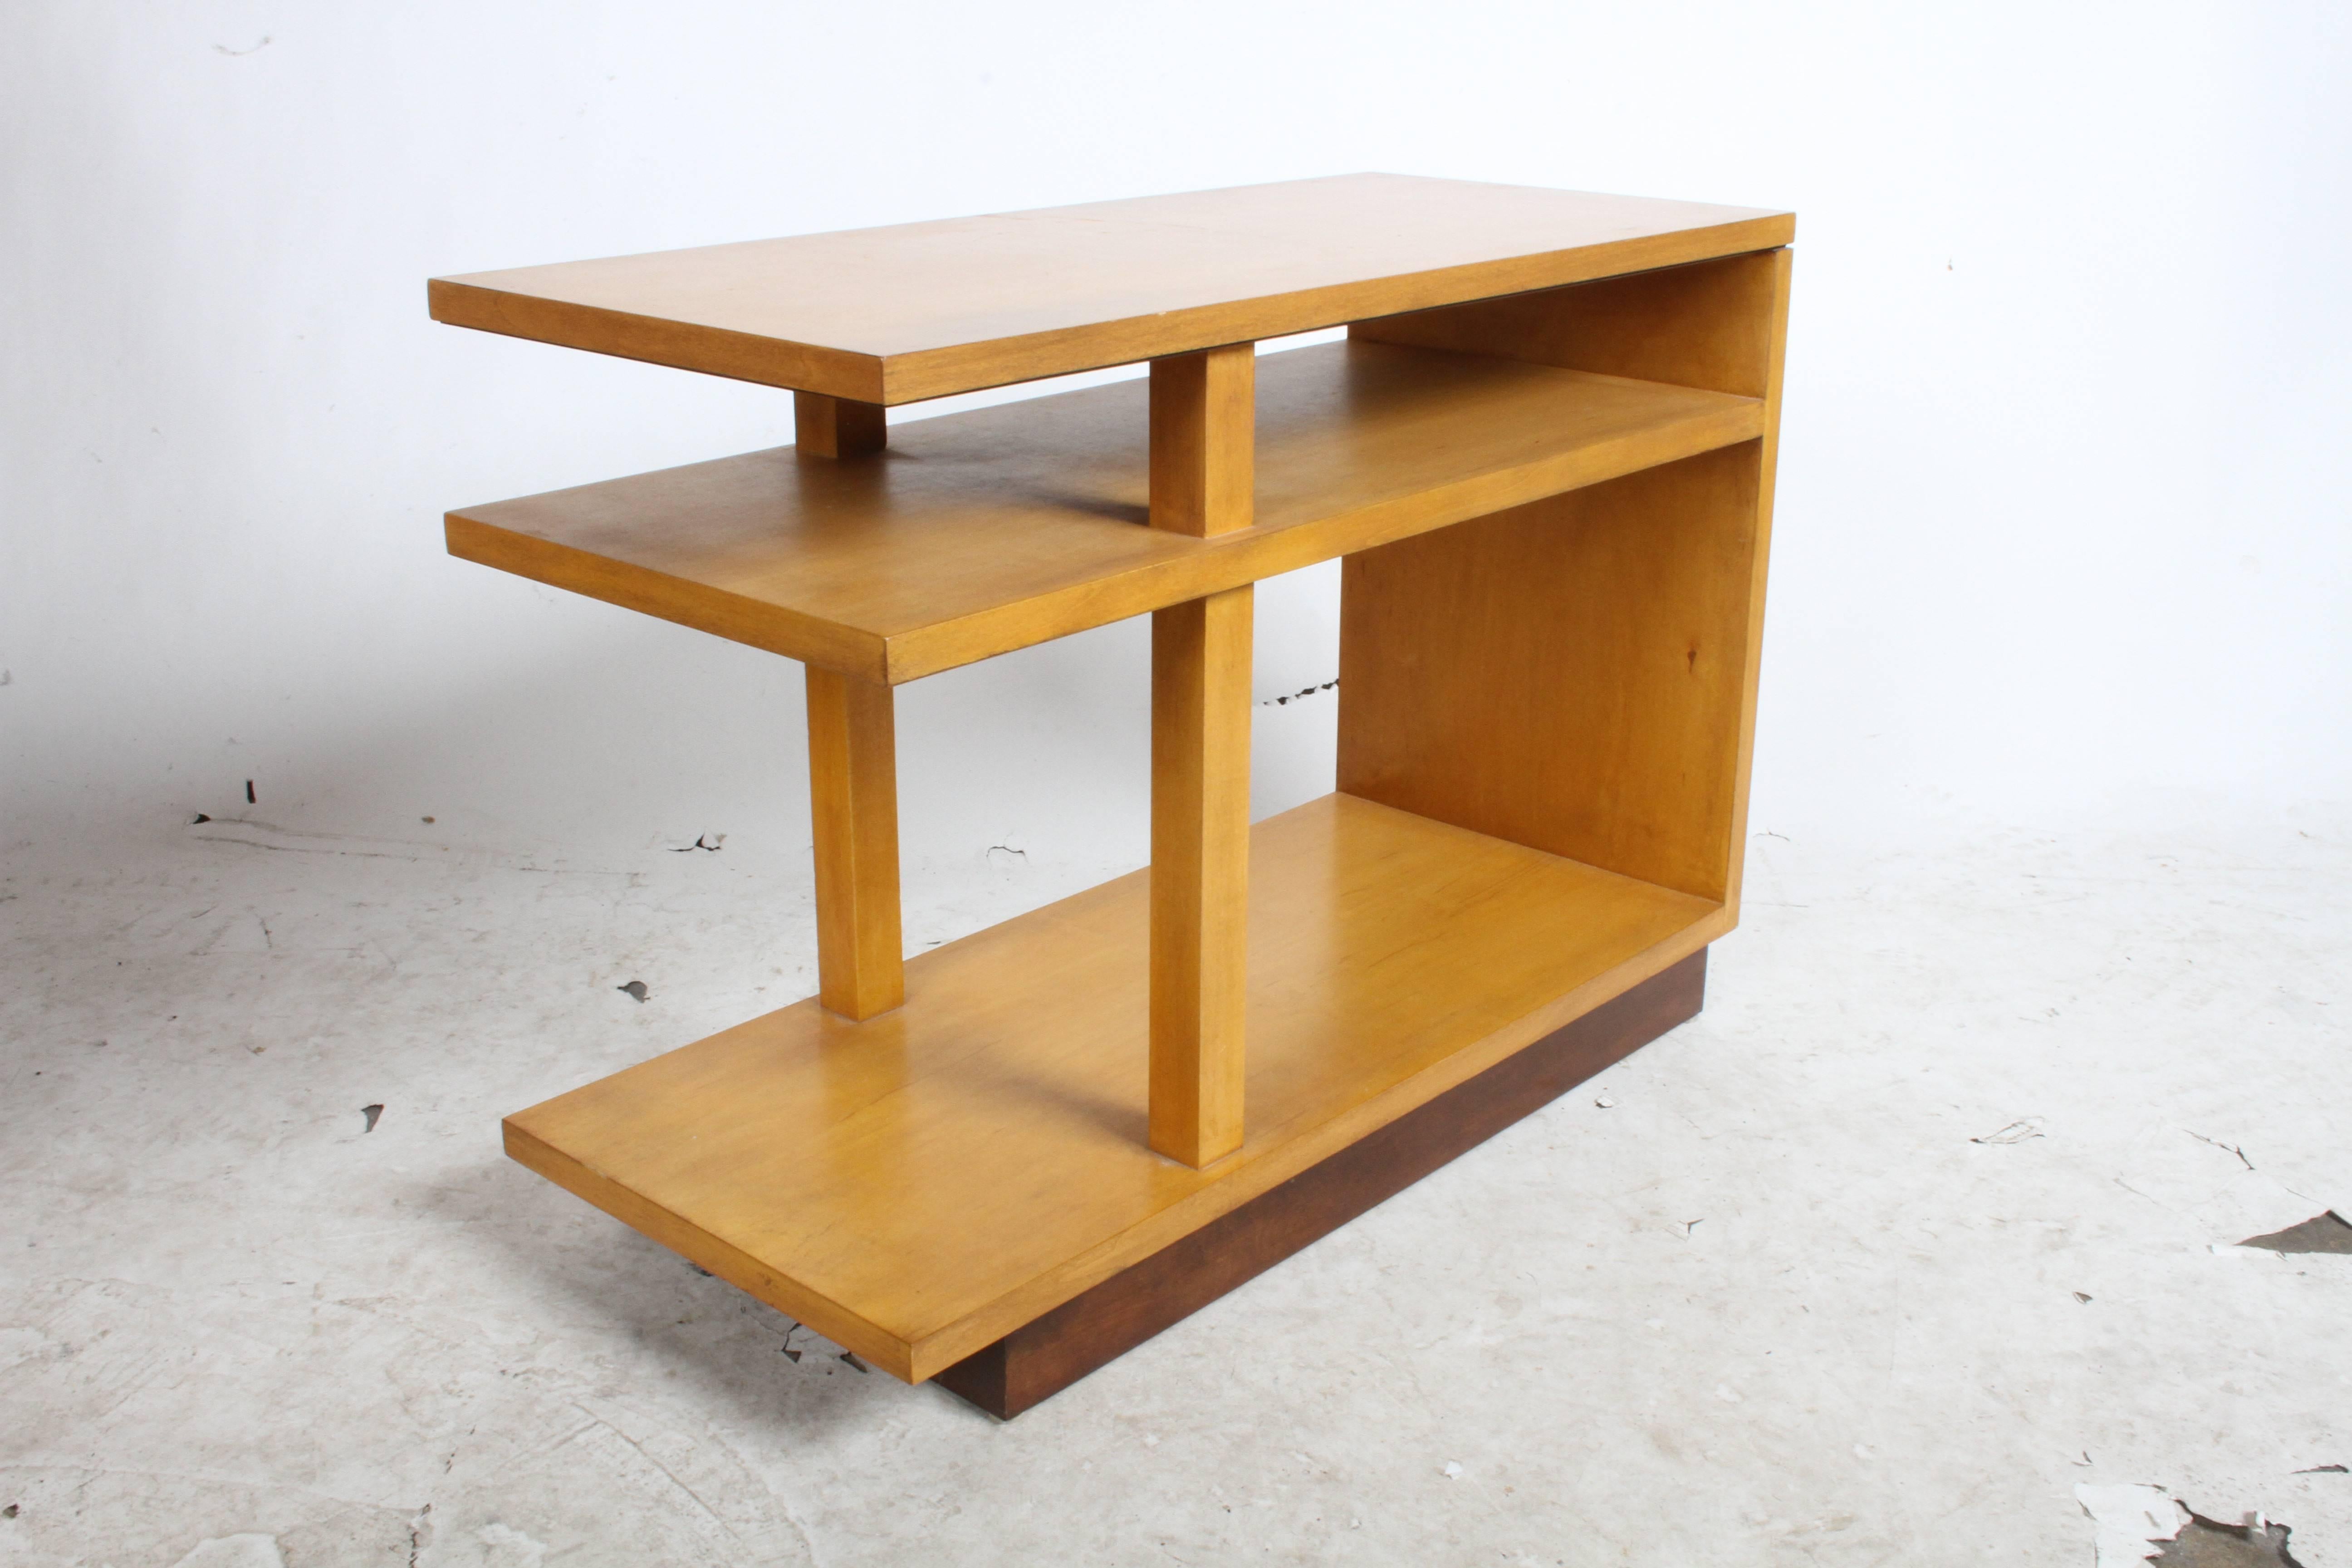 Pair of Rare Eliel Saarinen & Pipsan Saarinen Swanson For Johnson Furniture Company End Tables. Restored original finish blond finish, with walnut inset bases. The Finnish architect Eliel Saarinen was long-time president of the Cranbrook Academy of